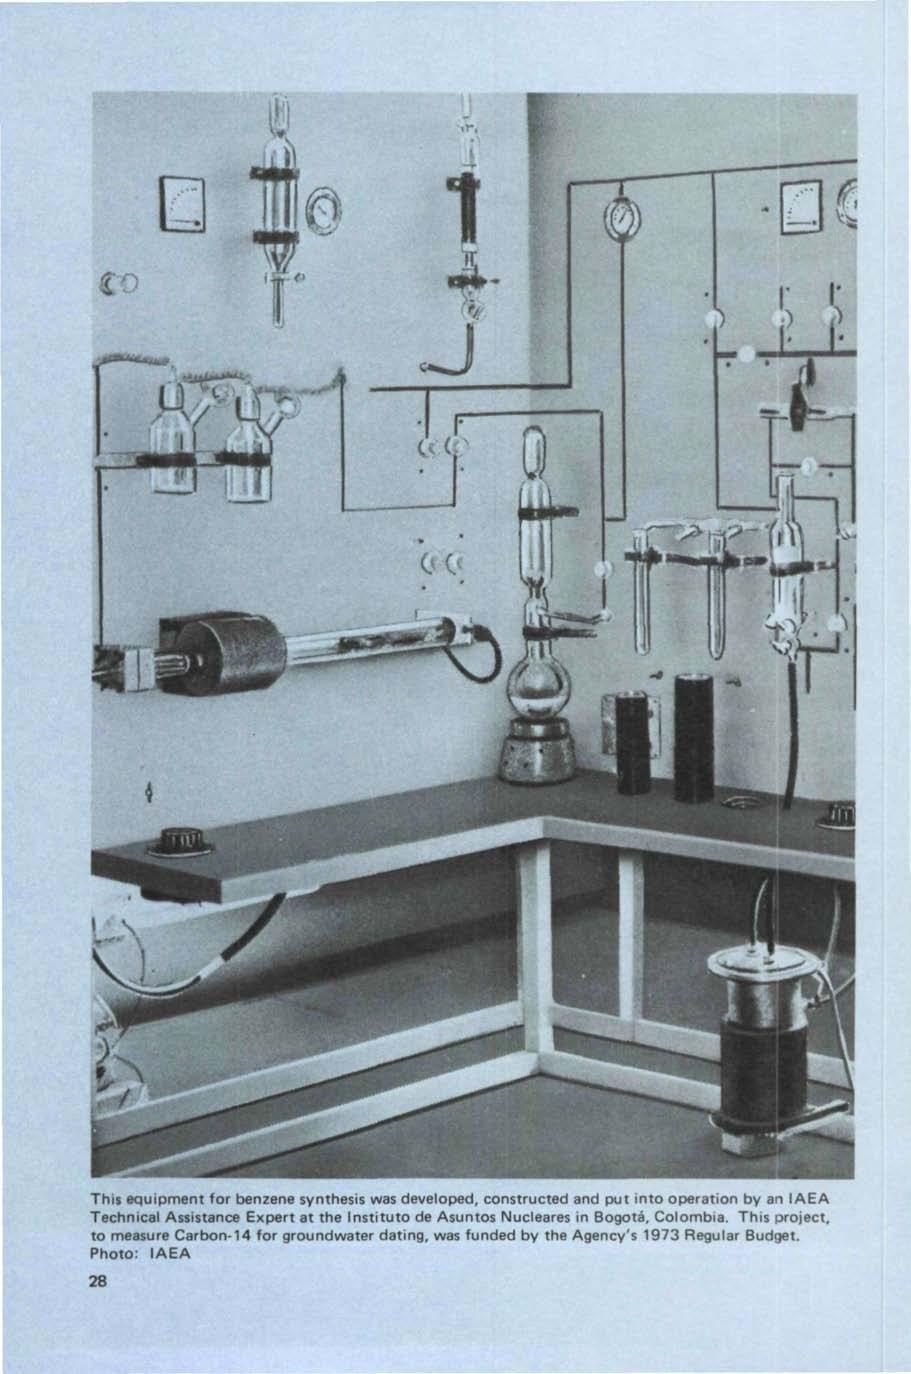 Thit equipment for benzene synthesis was developed, constructed and put in operation by an IAEA Technical Assistance Expert at the Institu de